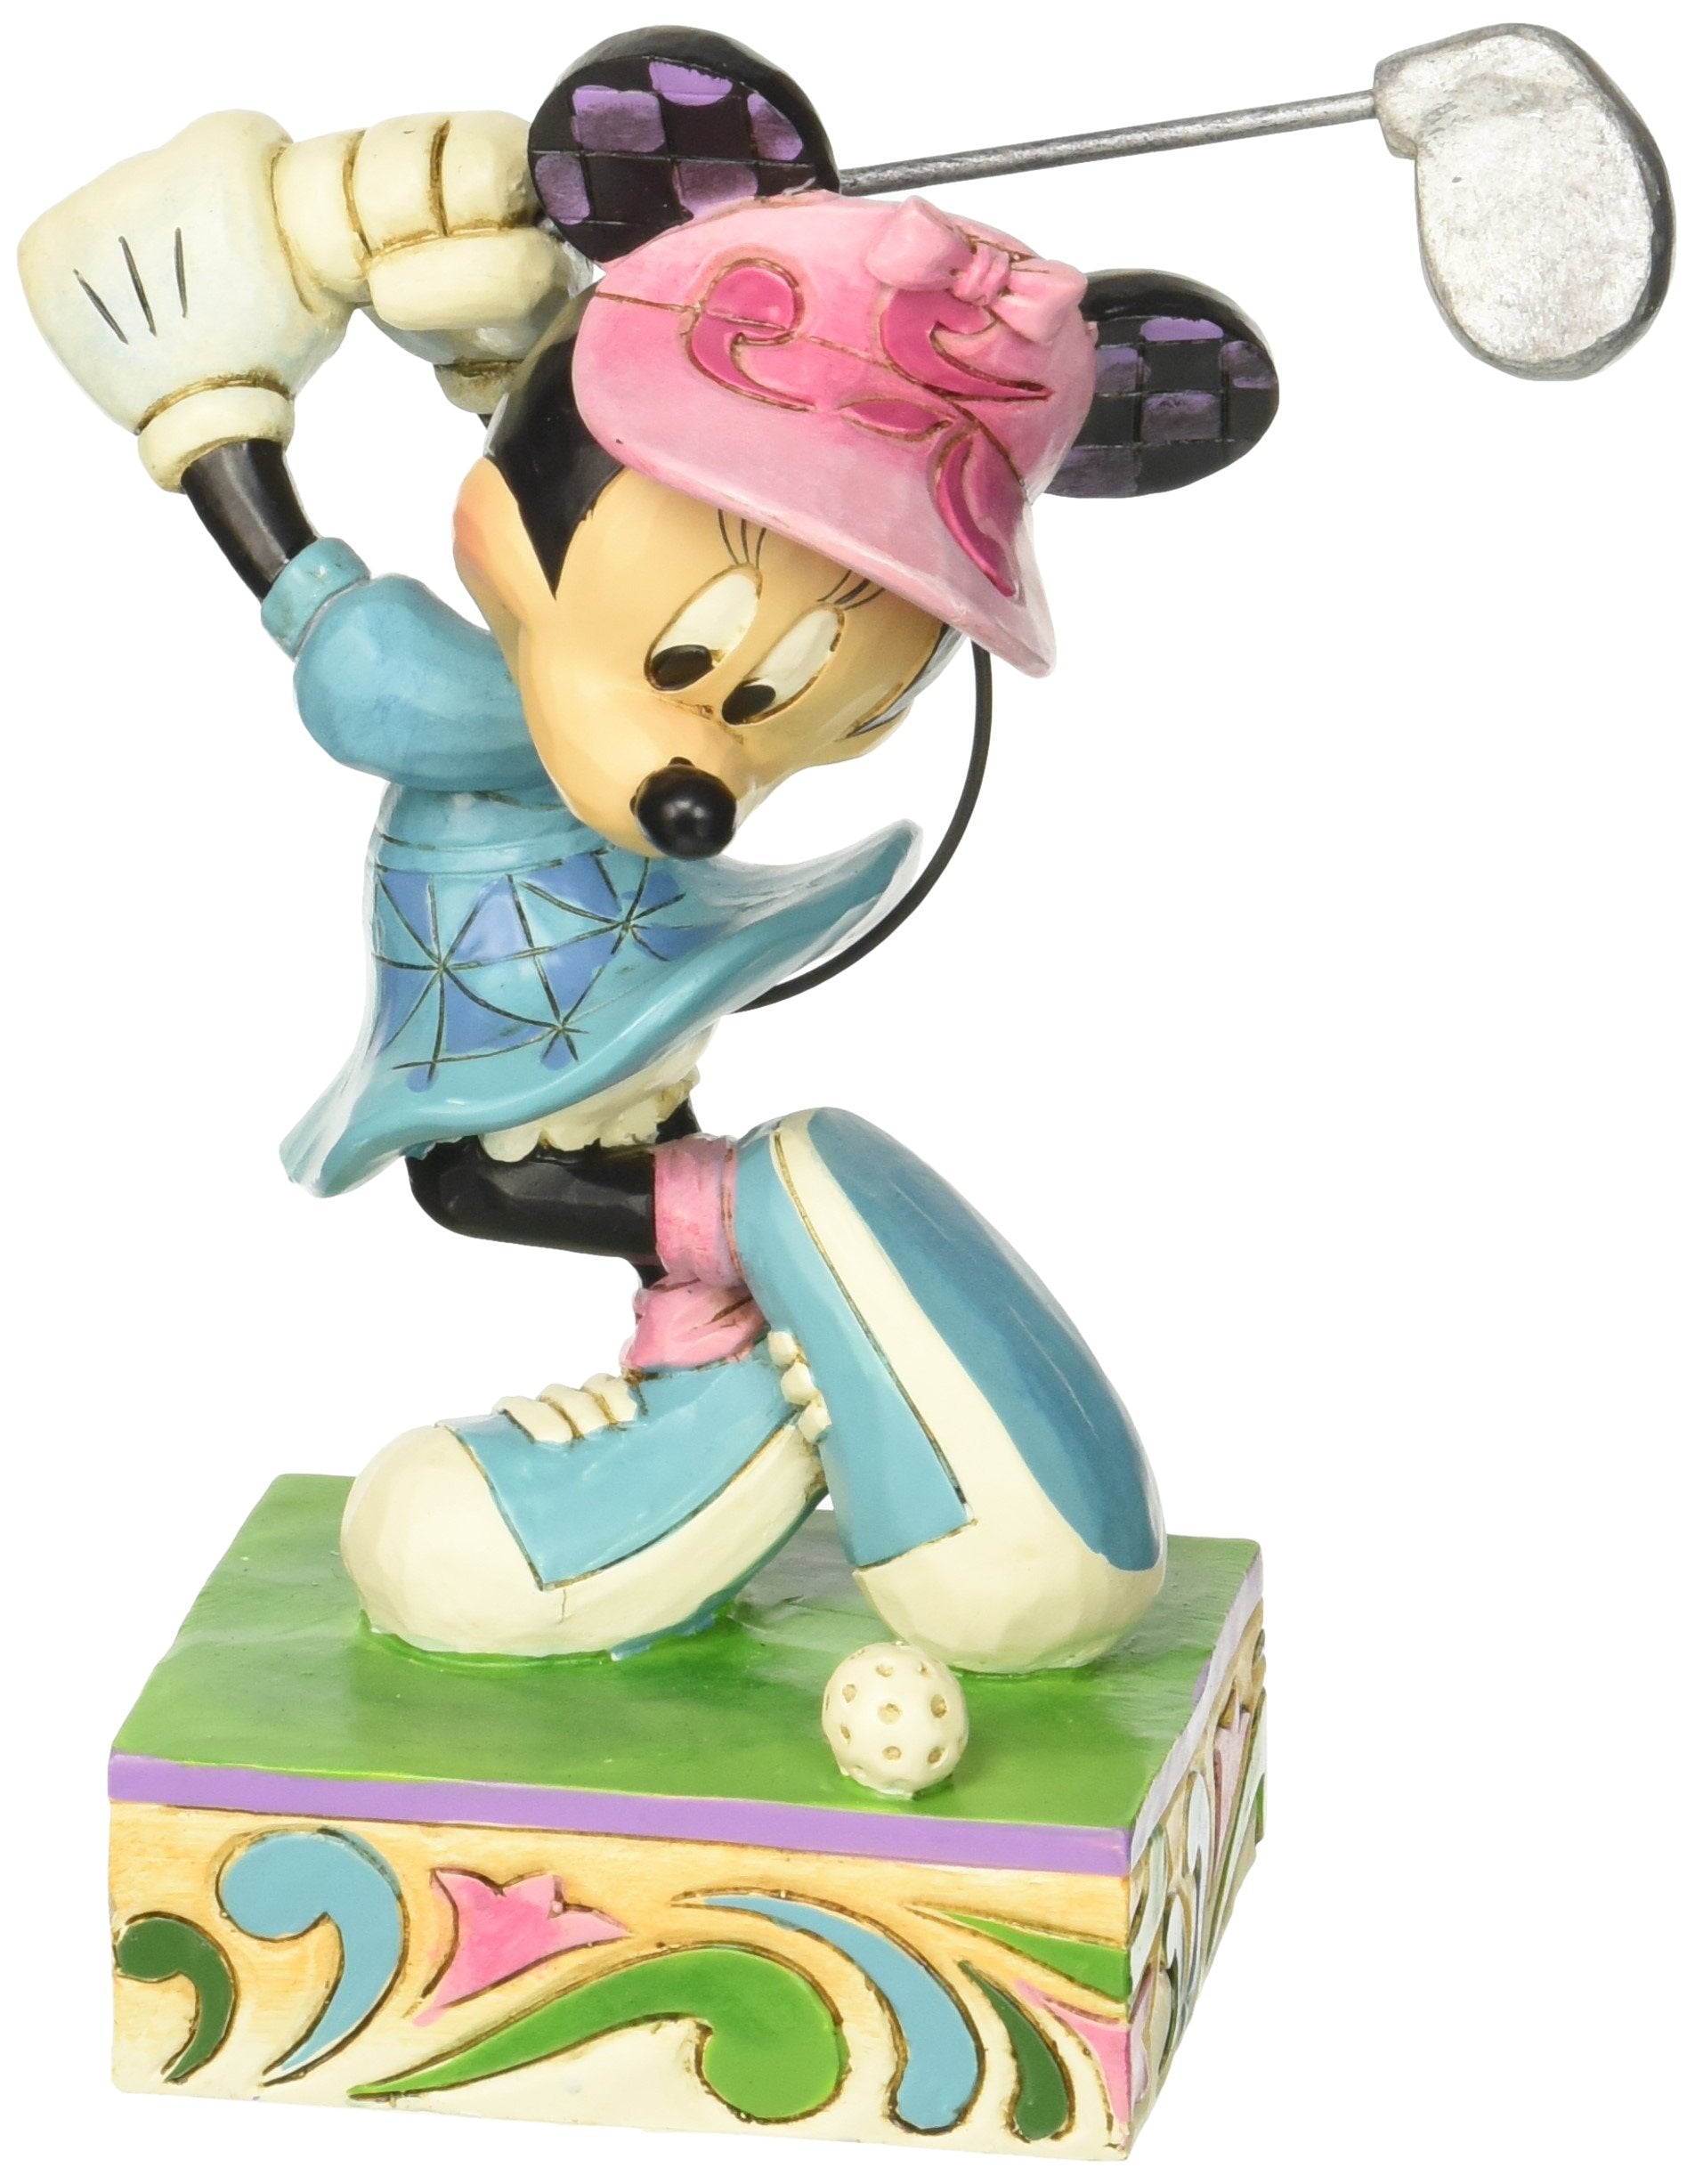 Enesco Disney Traditions by Jim Shore Minnie Mouse Golfing Figurine, 6 in